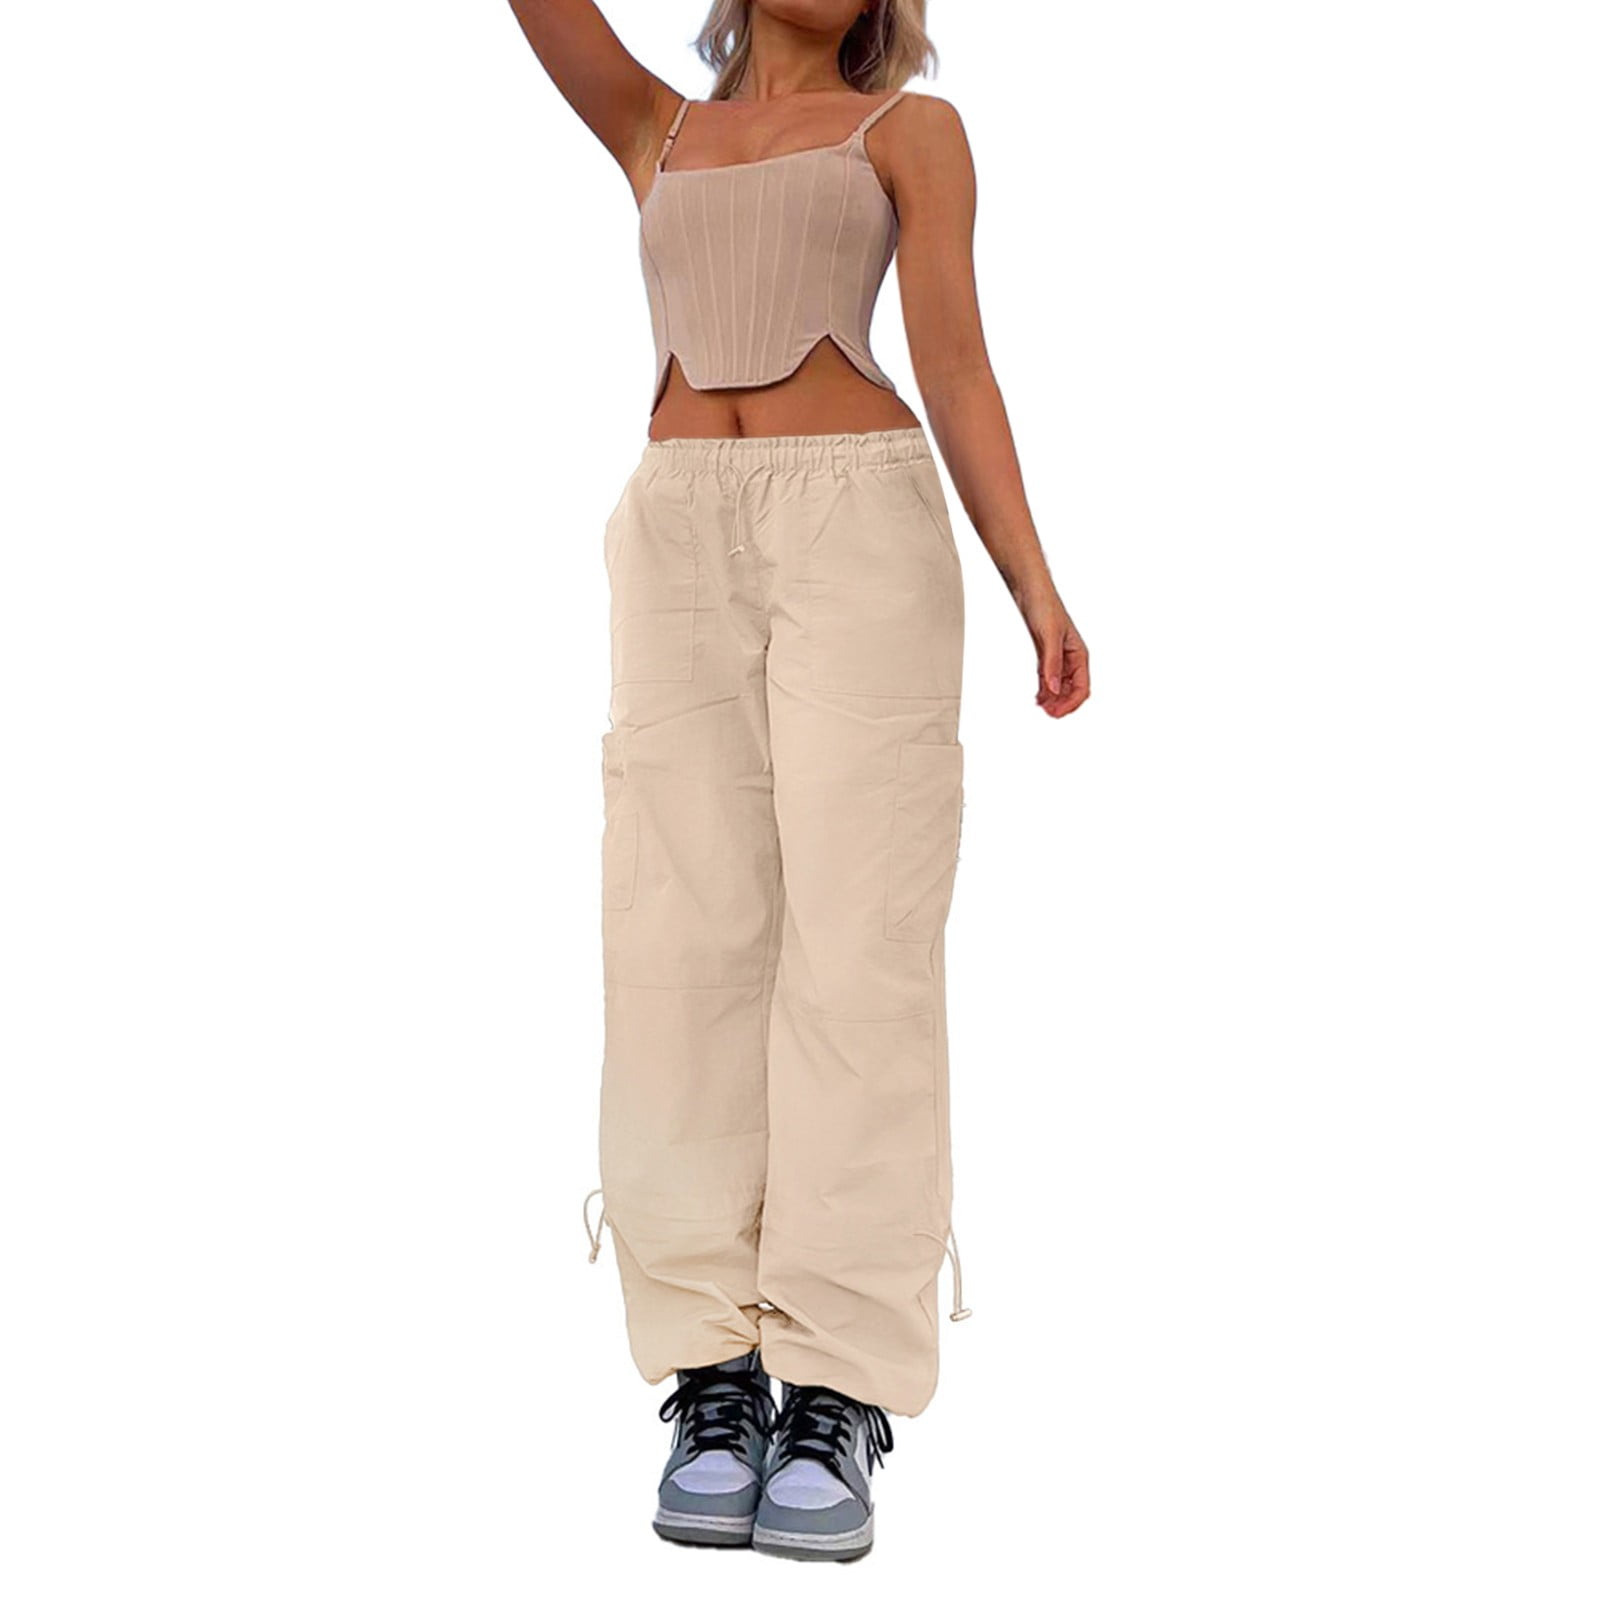 PMUYBHF Dress Pants Women Tall 35-37 Inseam Womens Casual Loose Straps  Multiple Pockets Straight Tube Elastic Cargo Pants July 4 Petite Plus Size Pants  for Women 